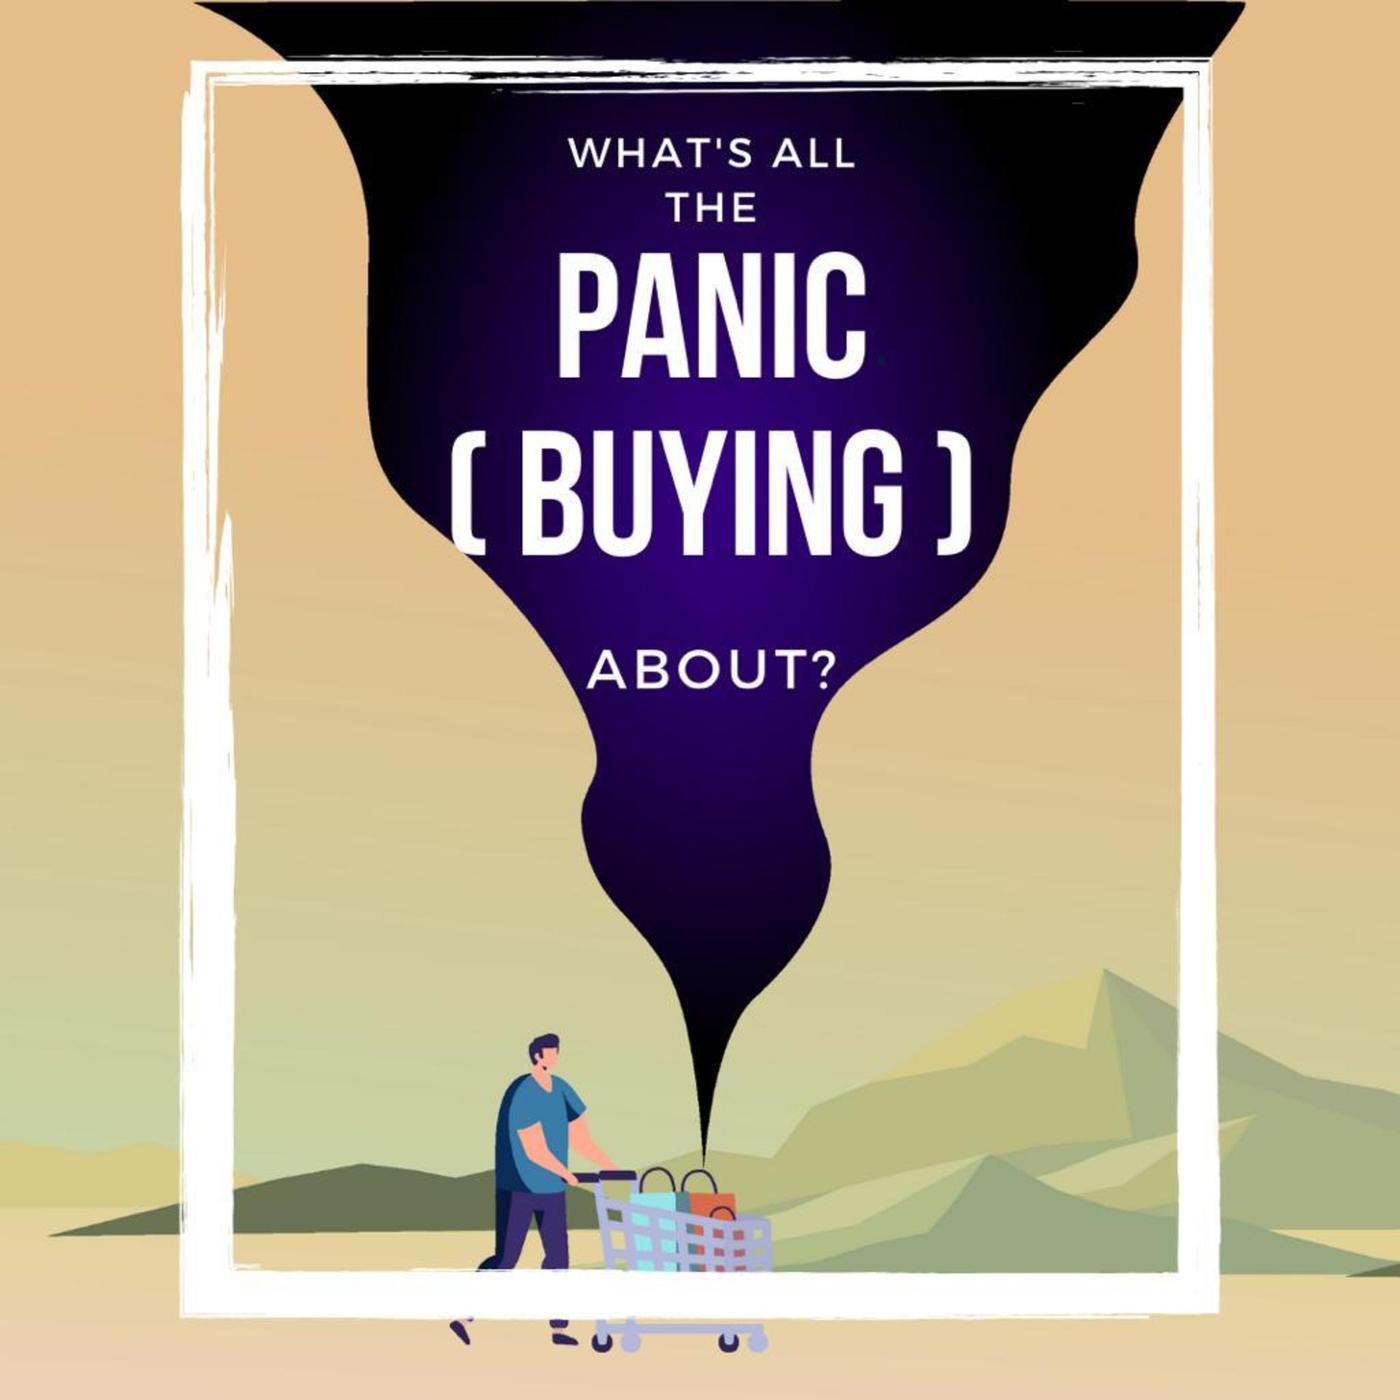 2. What Is All The Panic (buying) About?